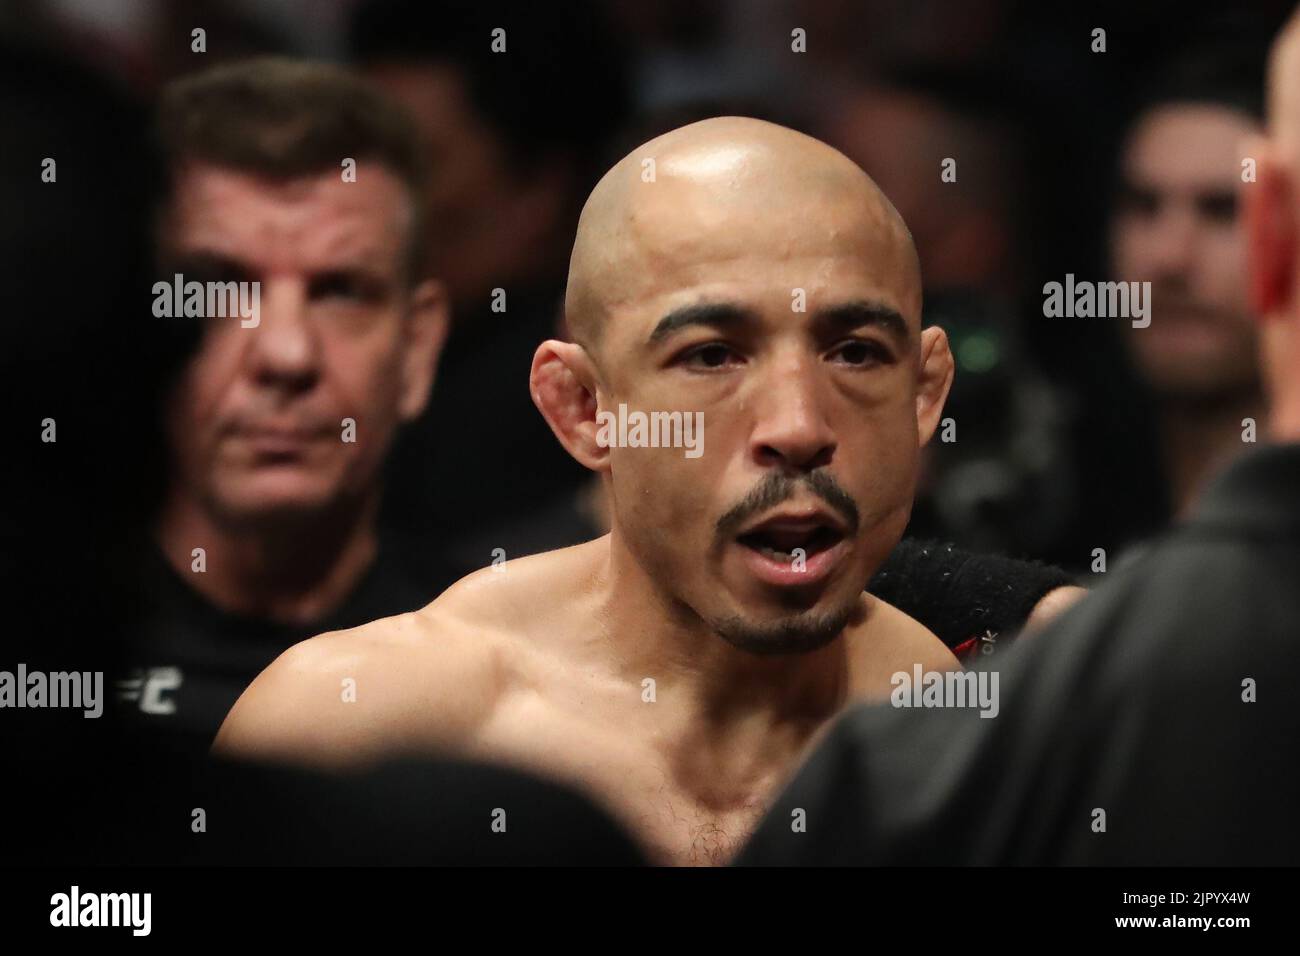 Salt Lake City, United States. 20th Aug, 2022. SALT LAKE CITY, UT - AUGUST 20: Jose Aldo prepares to fight Merab Dvalishvili in their Bantamweight bout during the UFC 278 at the Vivint Arena on August 20, 2022 in Salt Lake City, Utah, United States. (Photo by Alejandro Salazar/PxImages) Credit: Px Images/Alamy Live News Stock Photo